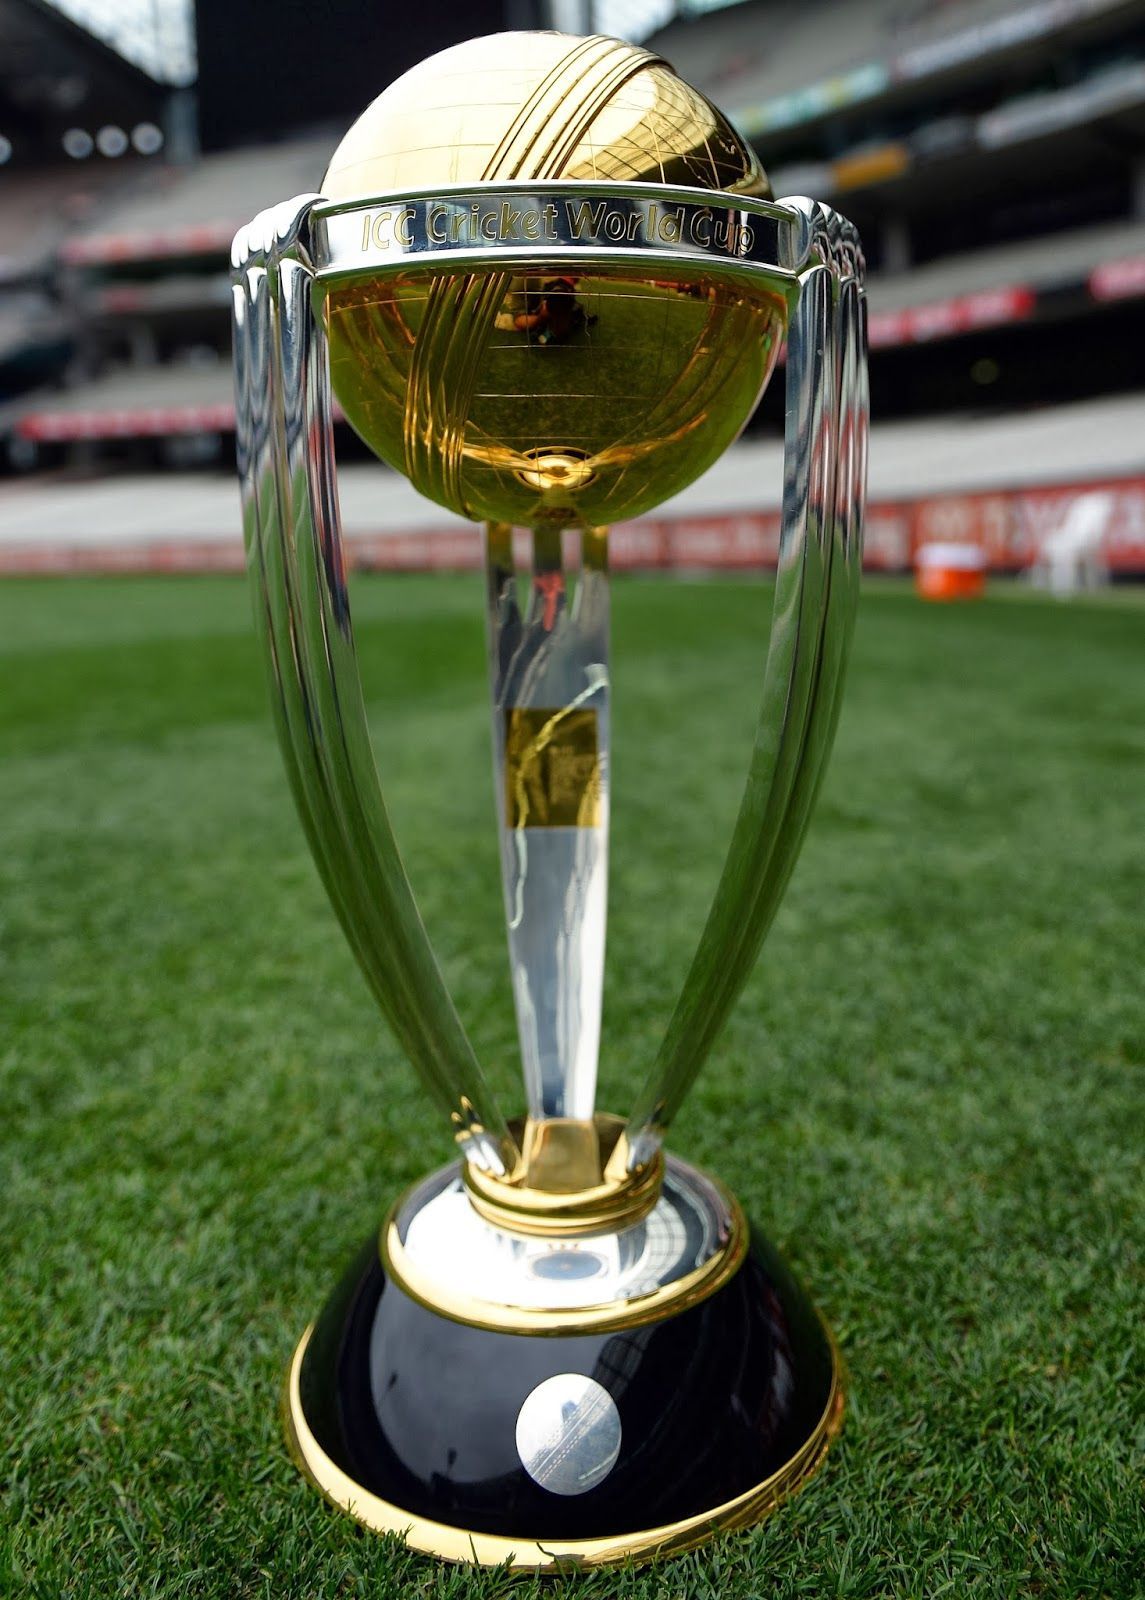 Best World cup trophy ideas. world cup trophy, trophy, world cup